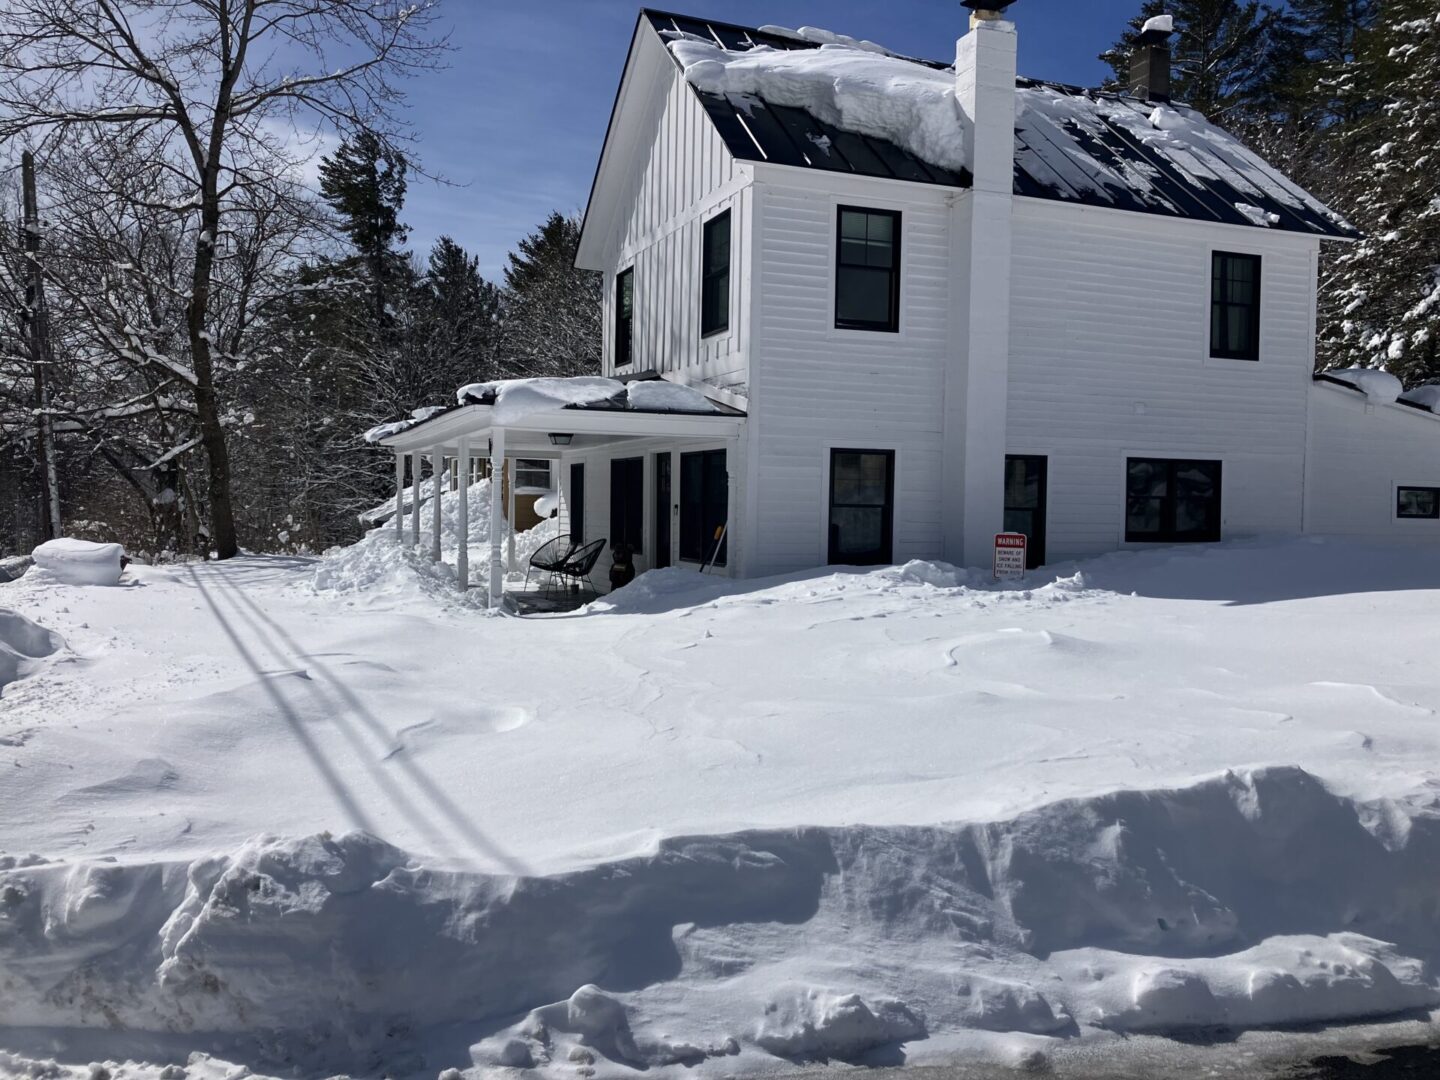 A house with snow piled up on the ground.